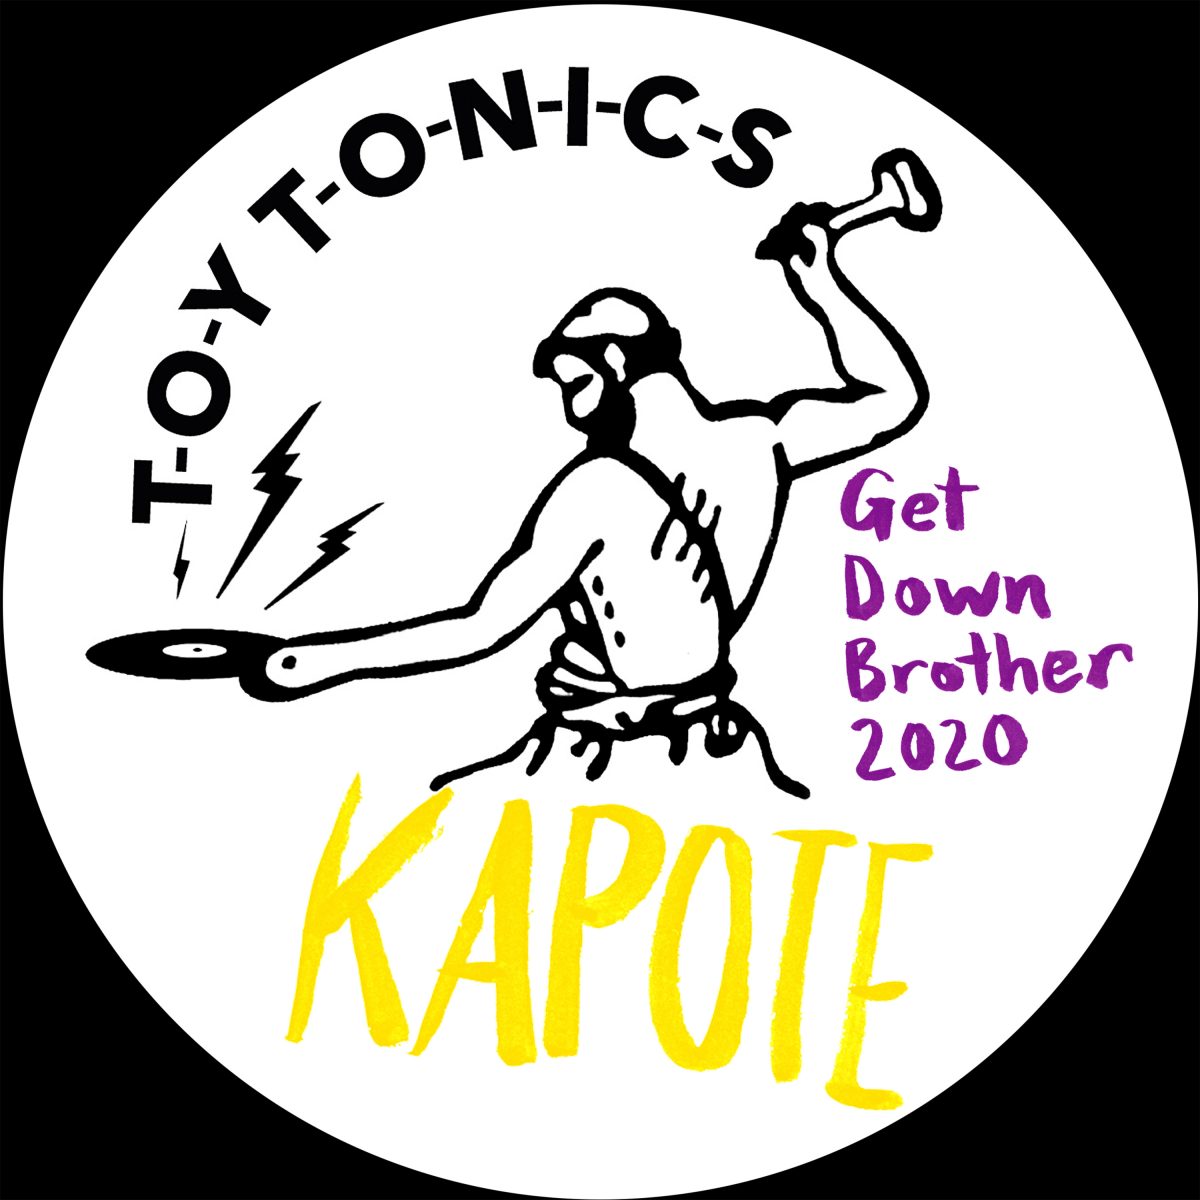 Kapote – Get Down Brother 2020 [TOYT090S2]